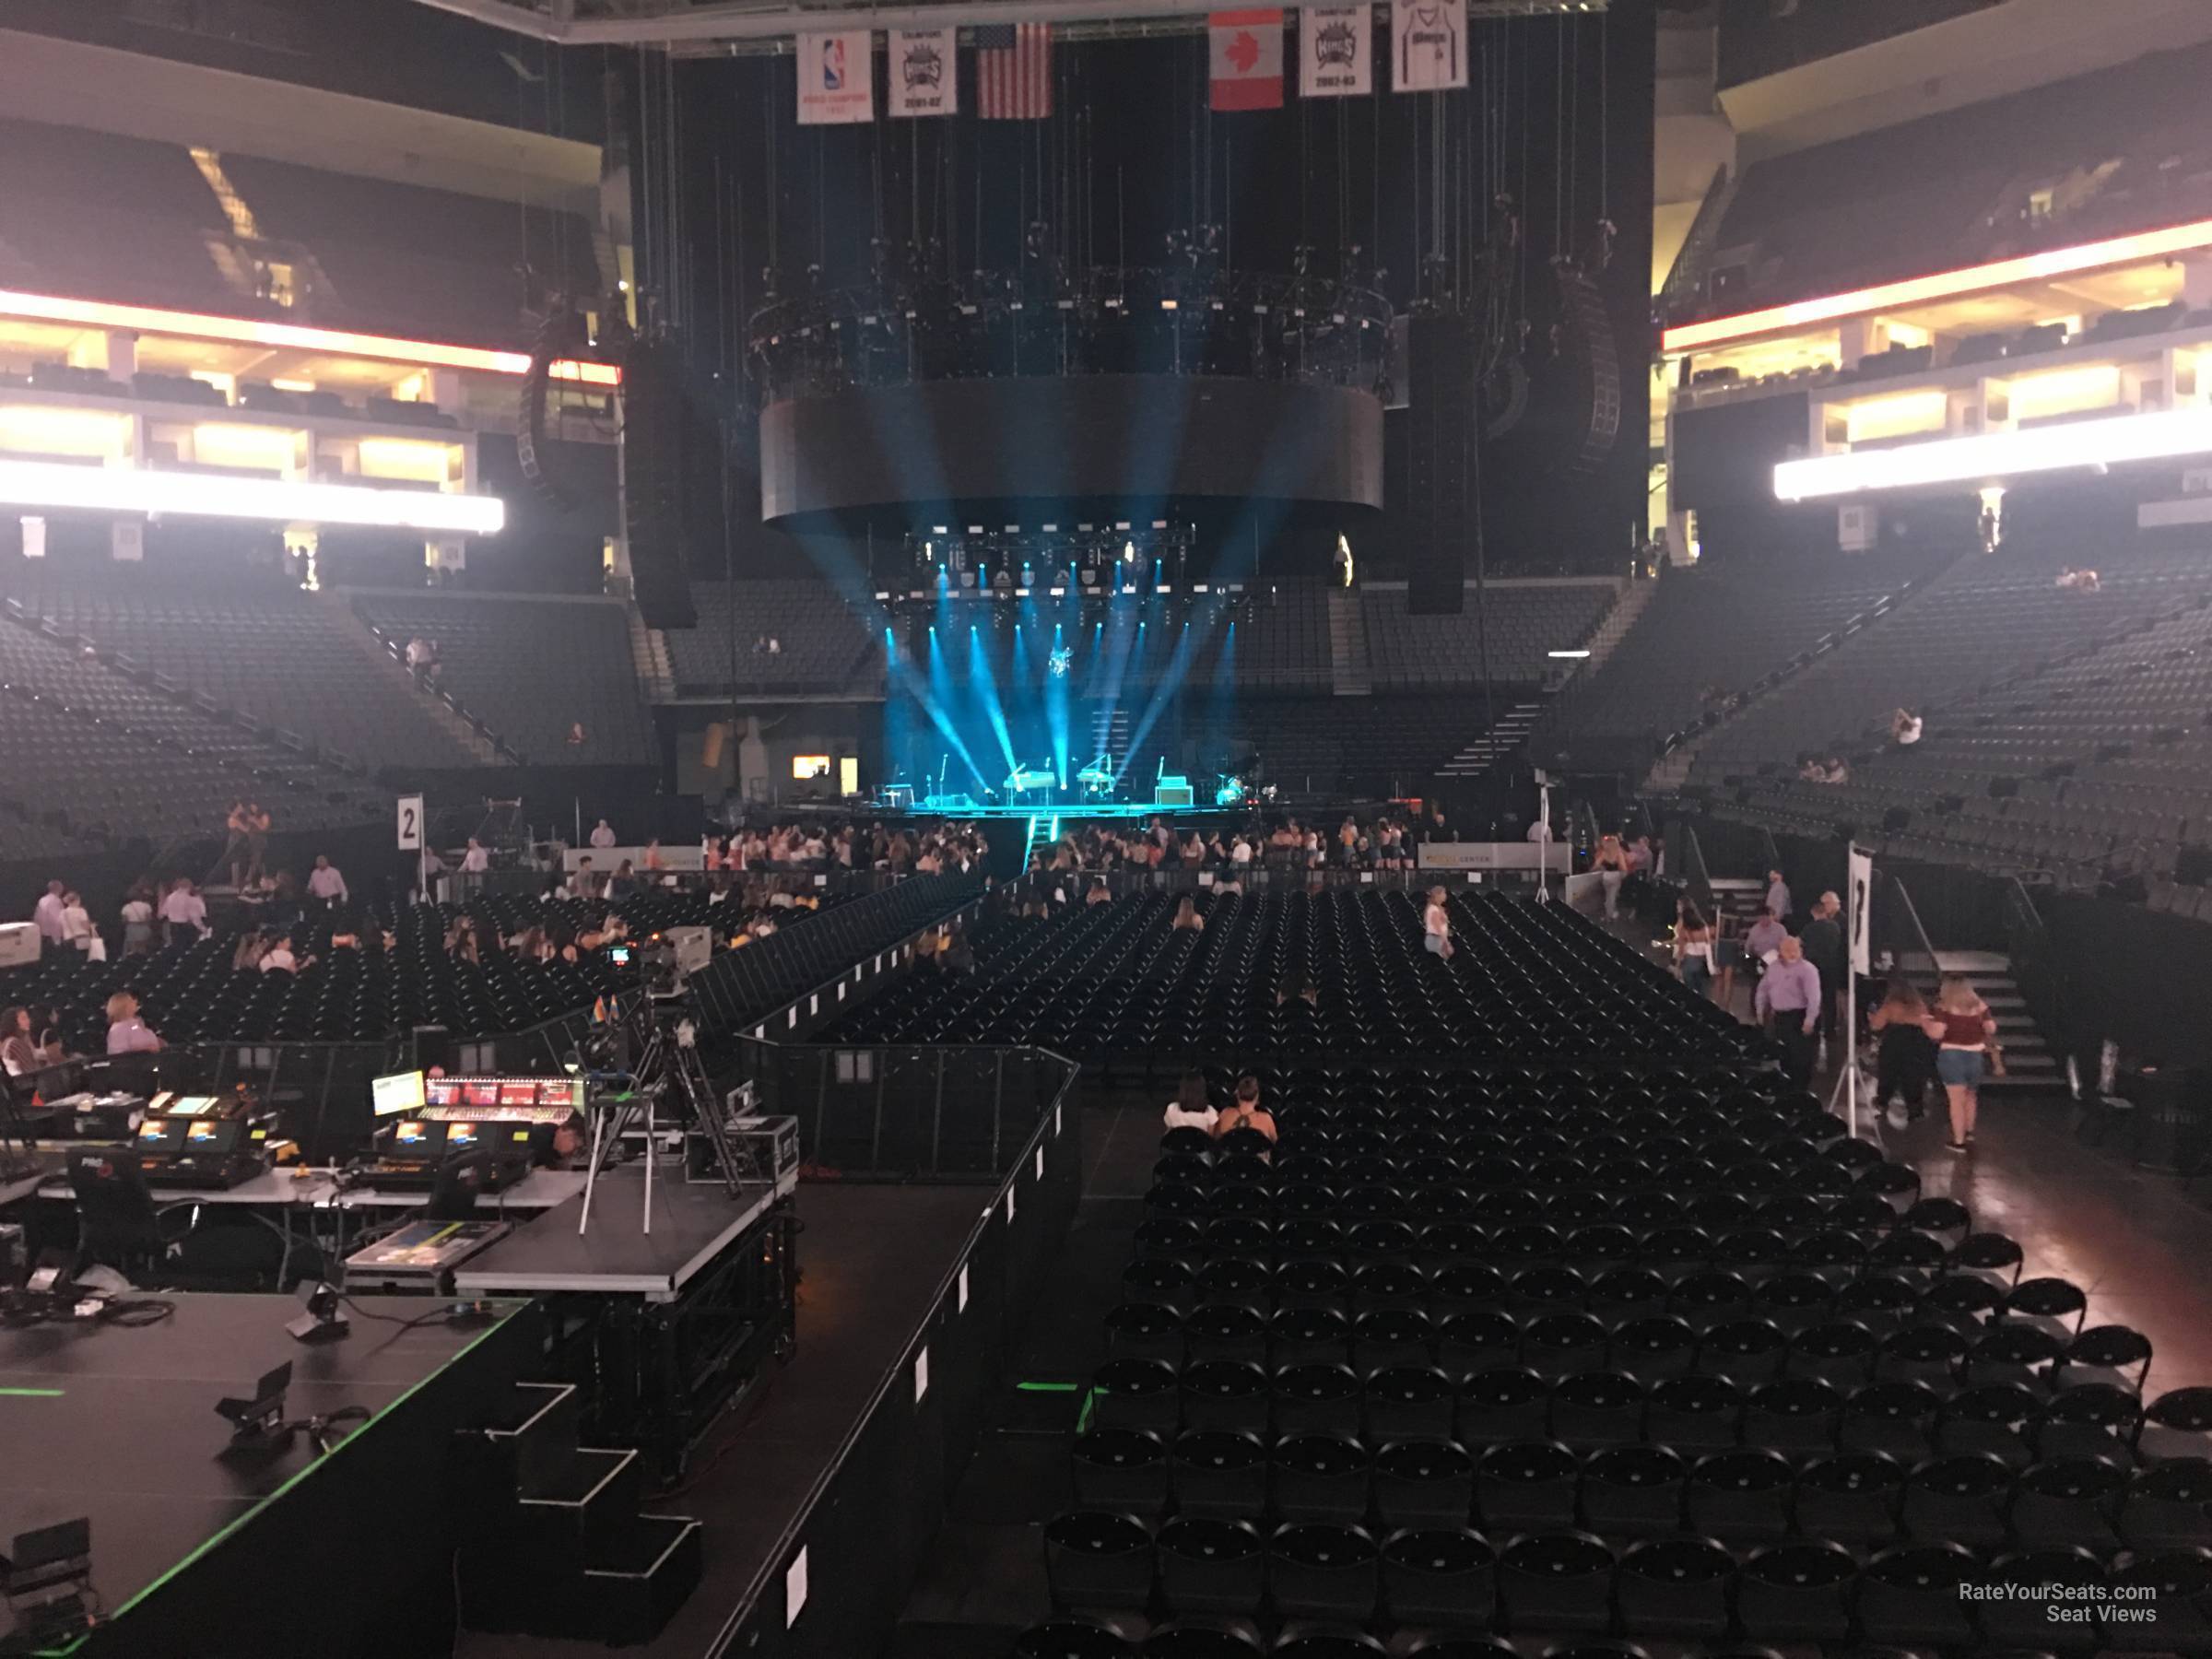 section 113, row a seat view  for concert - golden 1 center